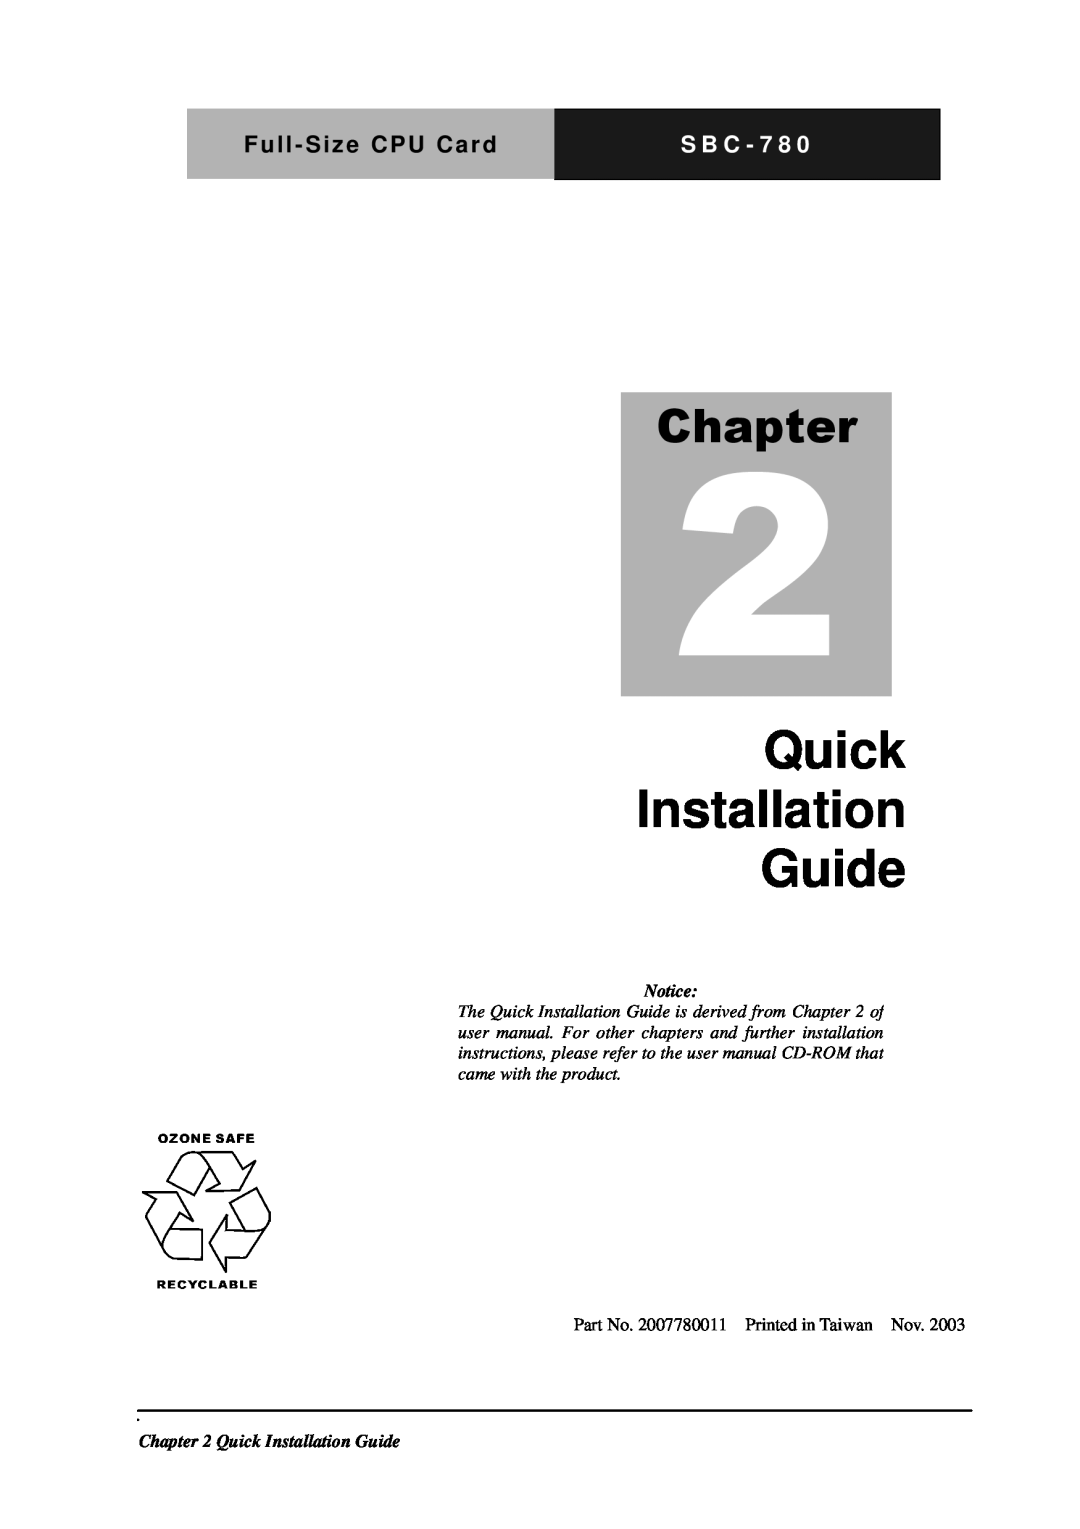 Intel SBC-780 manual Quick Installation Guide, Chapter, S B C - 7 8, Notice, Part No. 2007780011 Printed in Taiwan Nov 